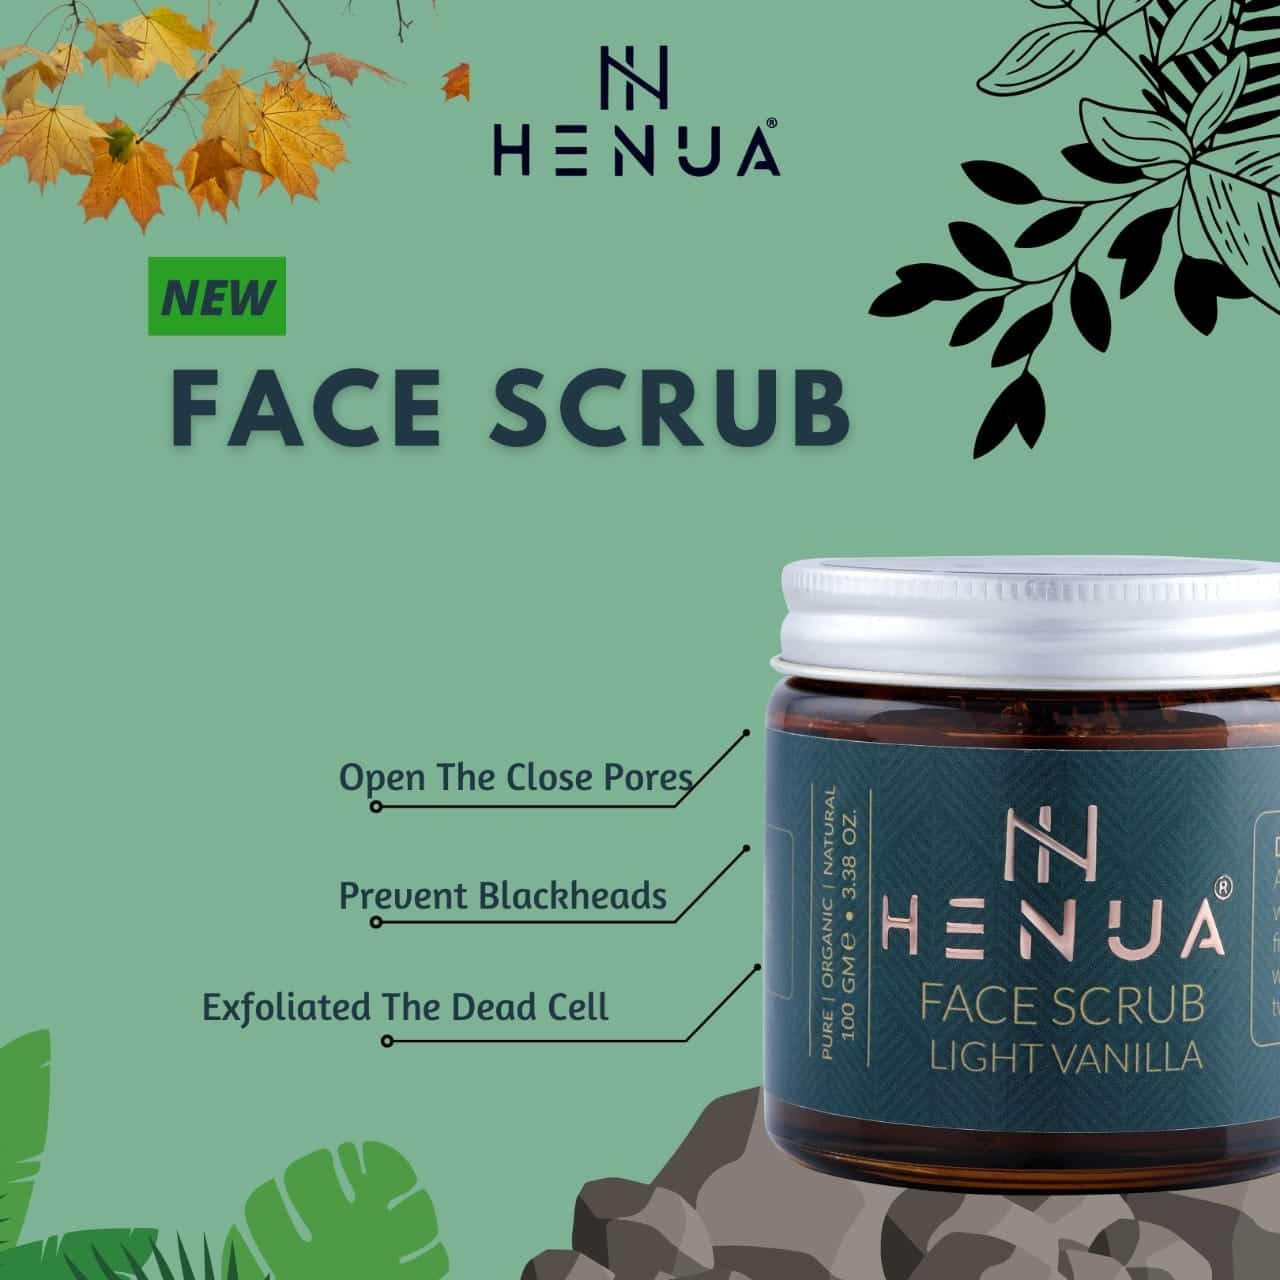 Get-A-Natural-Glow-With-Henua-Face-Scrub